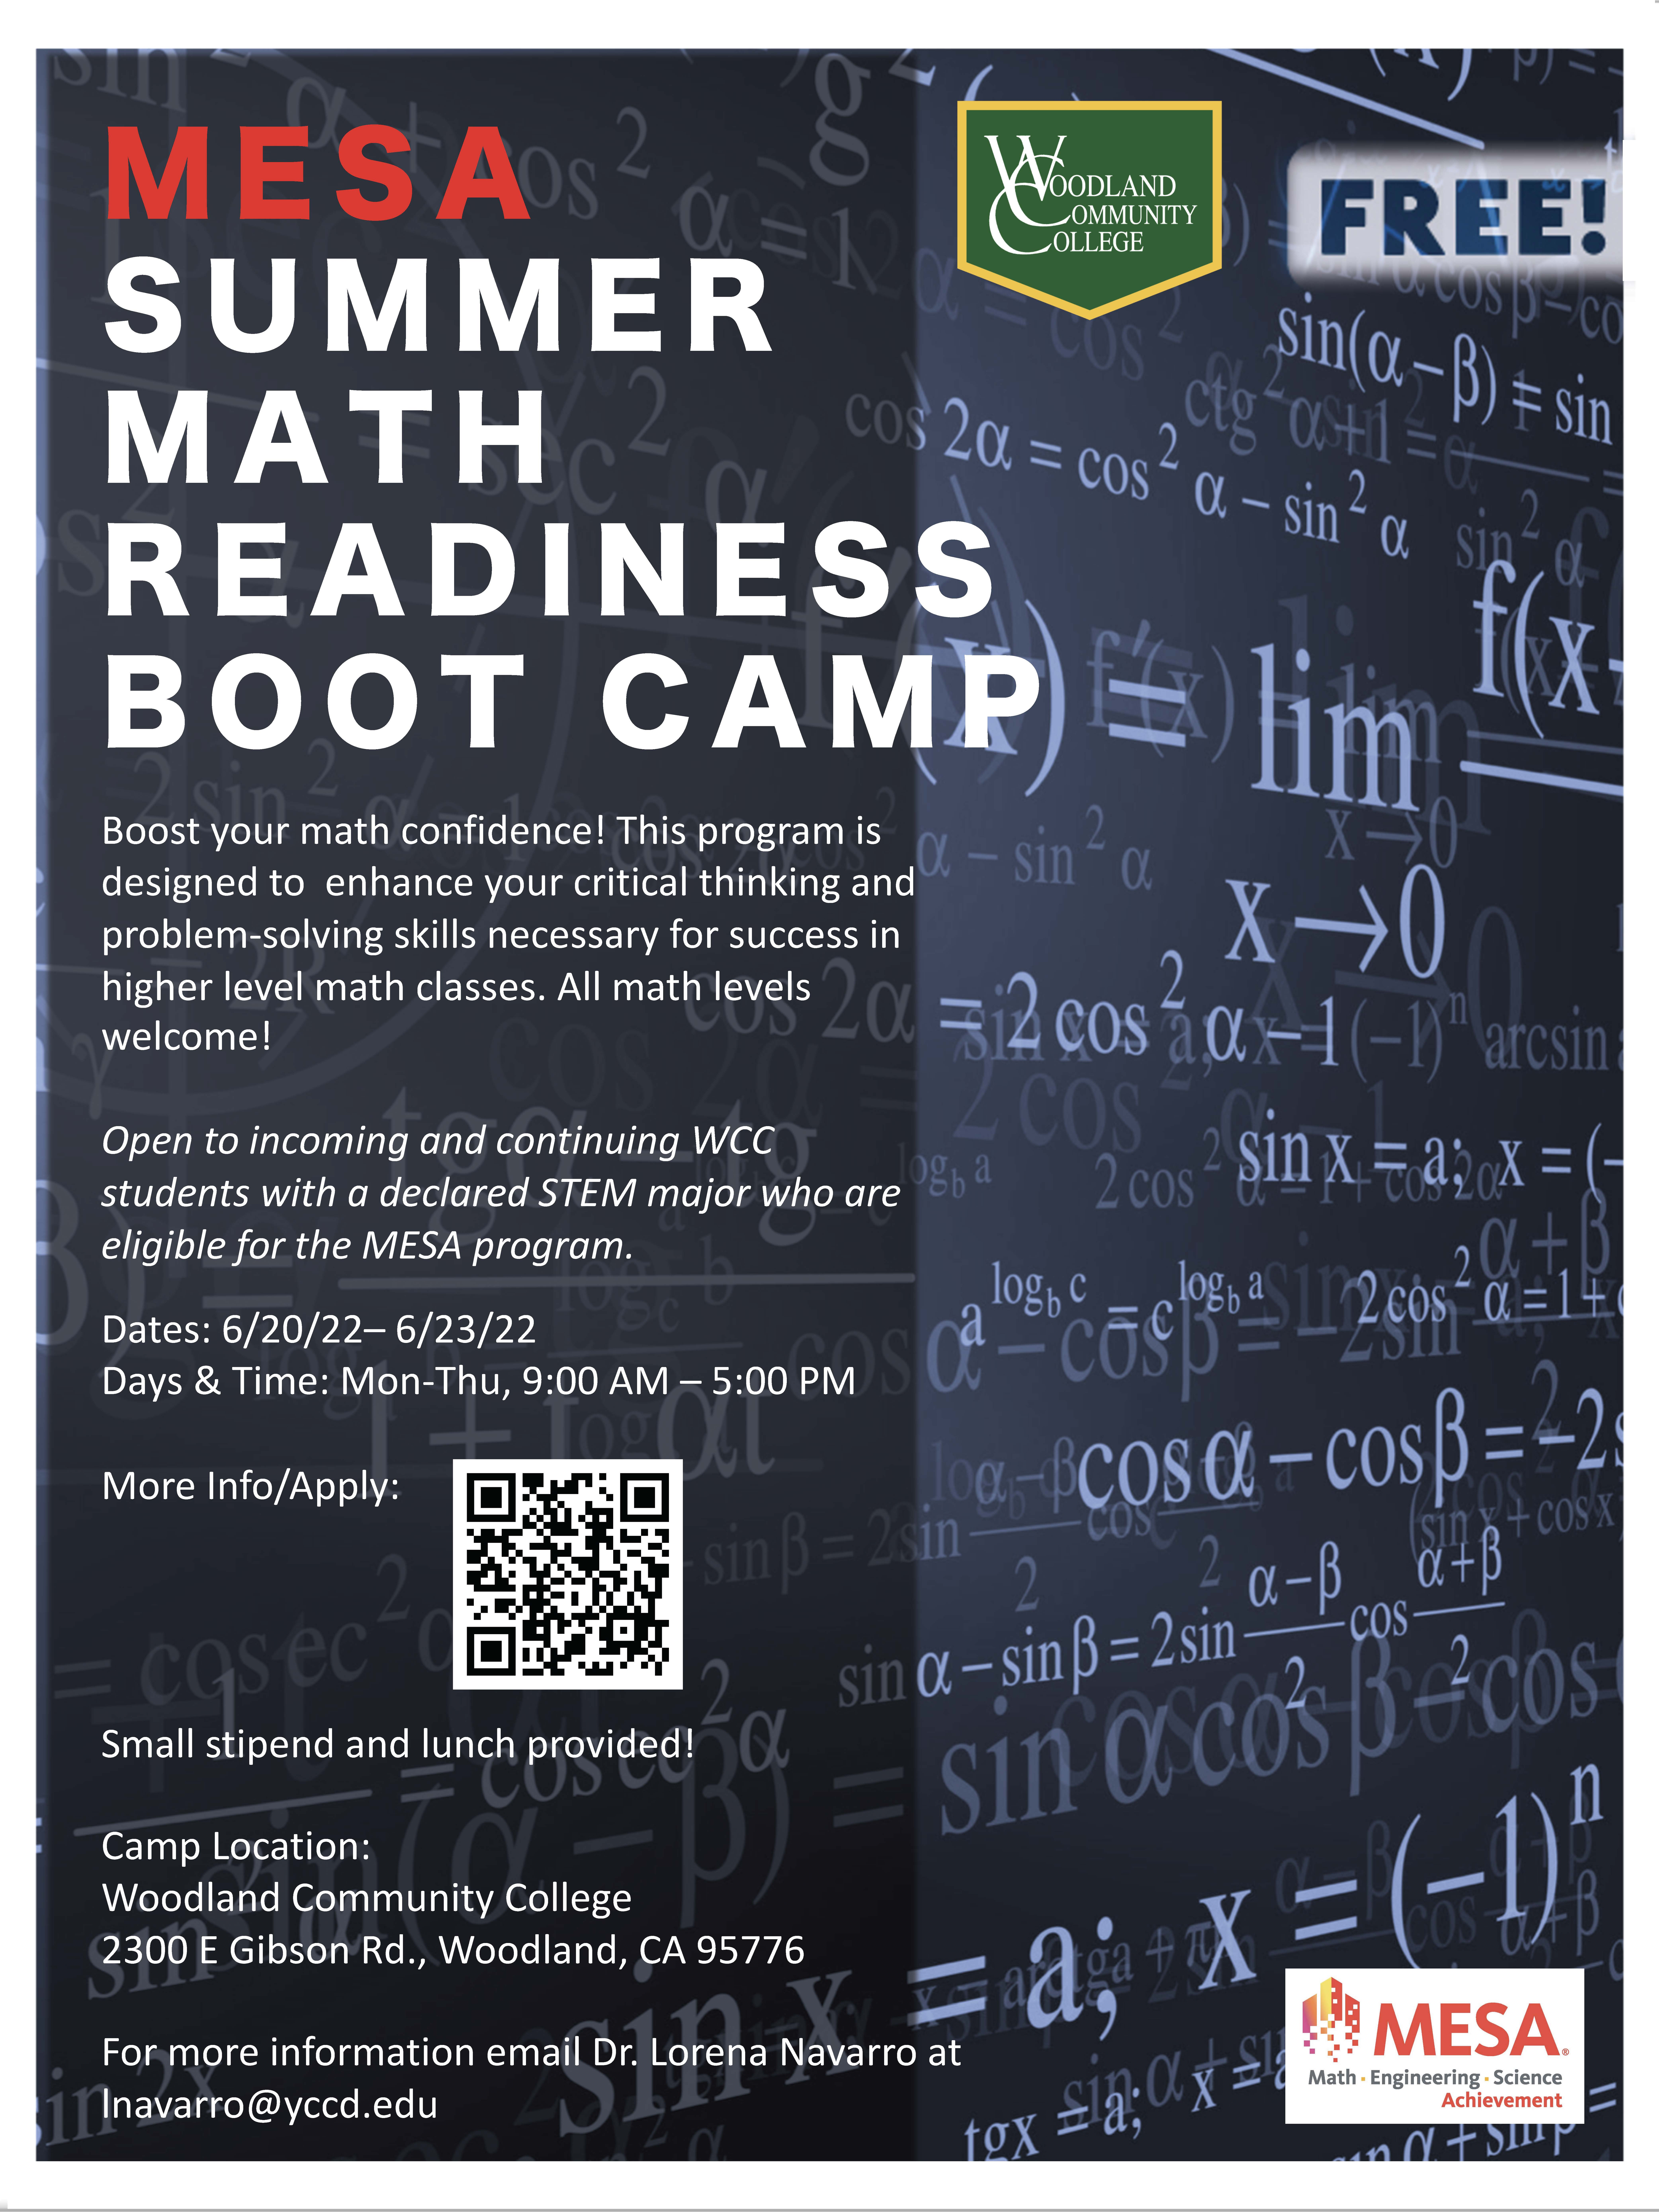 Flyer for Math Readiness Boot Camp